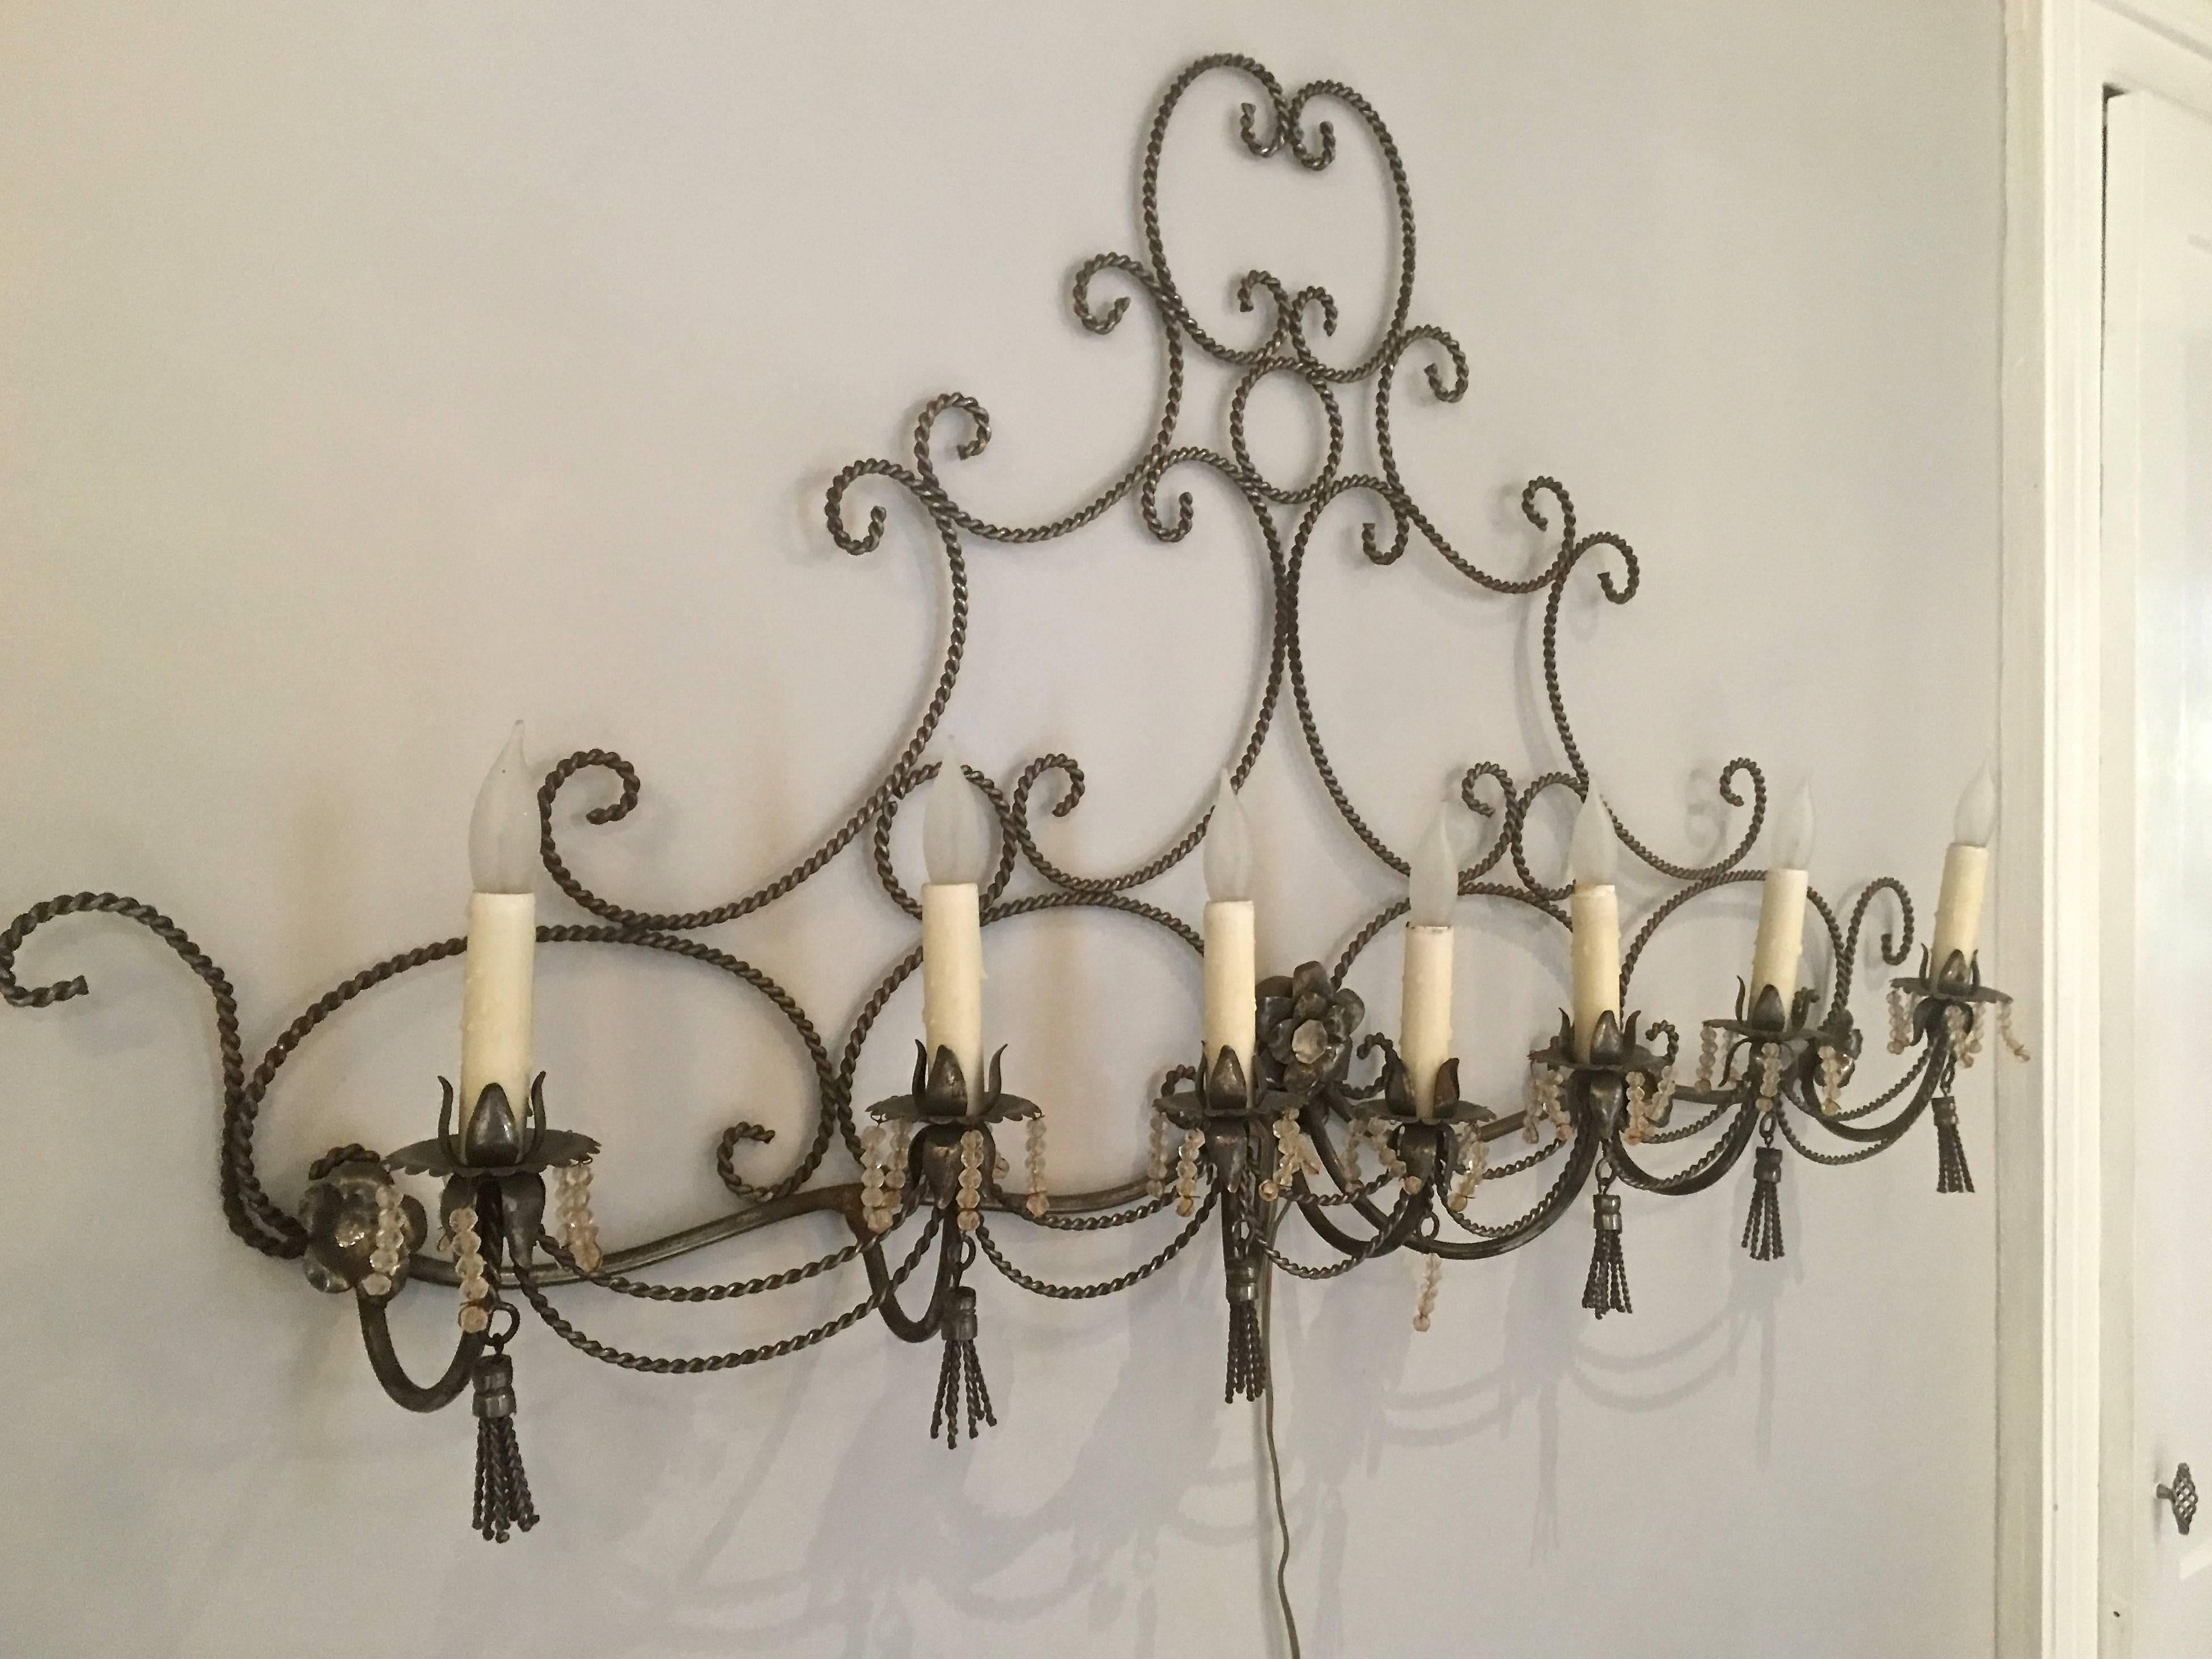 This very long six-candle wall sconce would make a perfect focal point on a wall over a bed or in a bathroom. The scrolling rope frame is accented with six candle-lights with bobeches with glass bead drops and steel tassels on each light. Gorgeous,